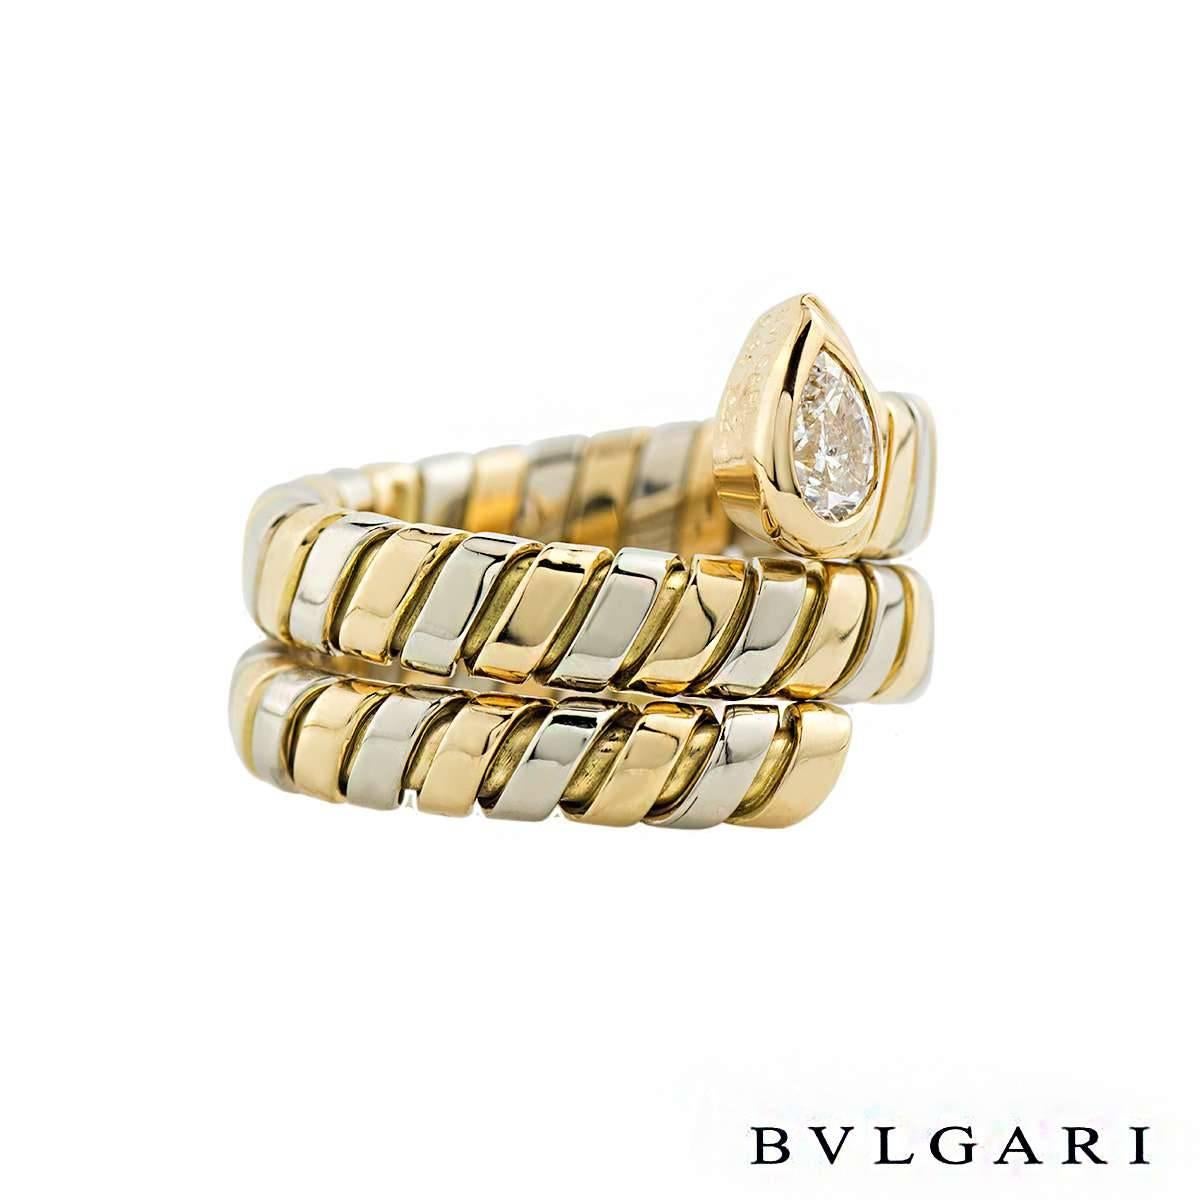 A trendy 18k yellow and white gold diamond Bvlgari ring from the Tubogas collection. The ring comprises of a pear cut diamond with a total carat weight of 0.38ct, G colour and VS clarity, set to a flexi link serpant design band. The ring is 1.7cm in